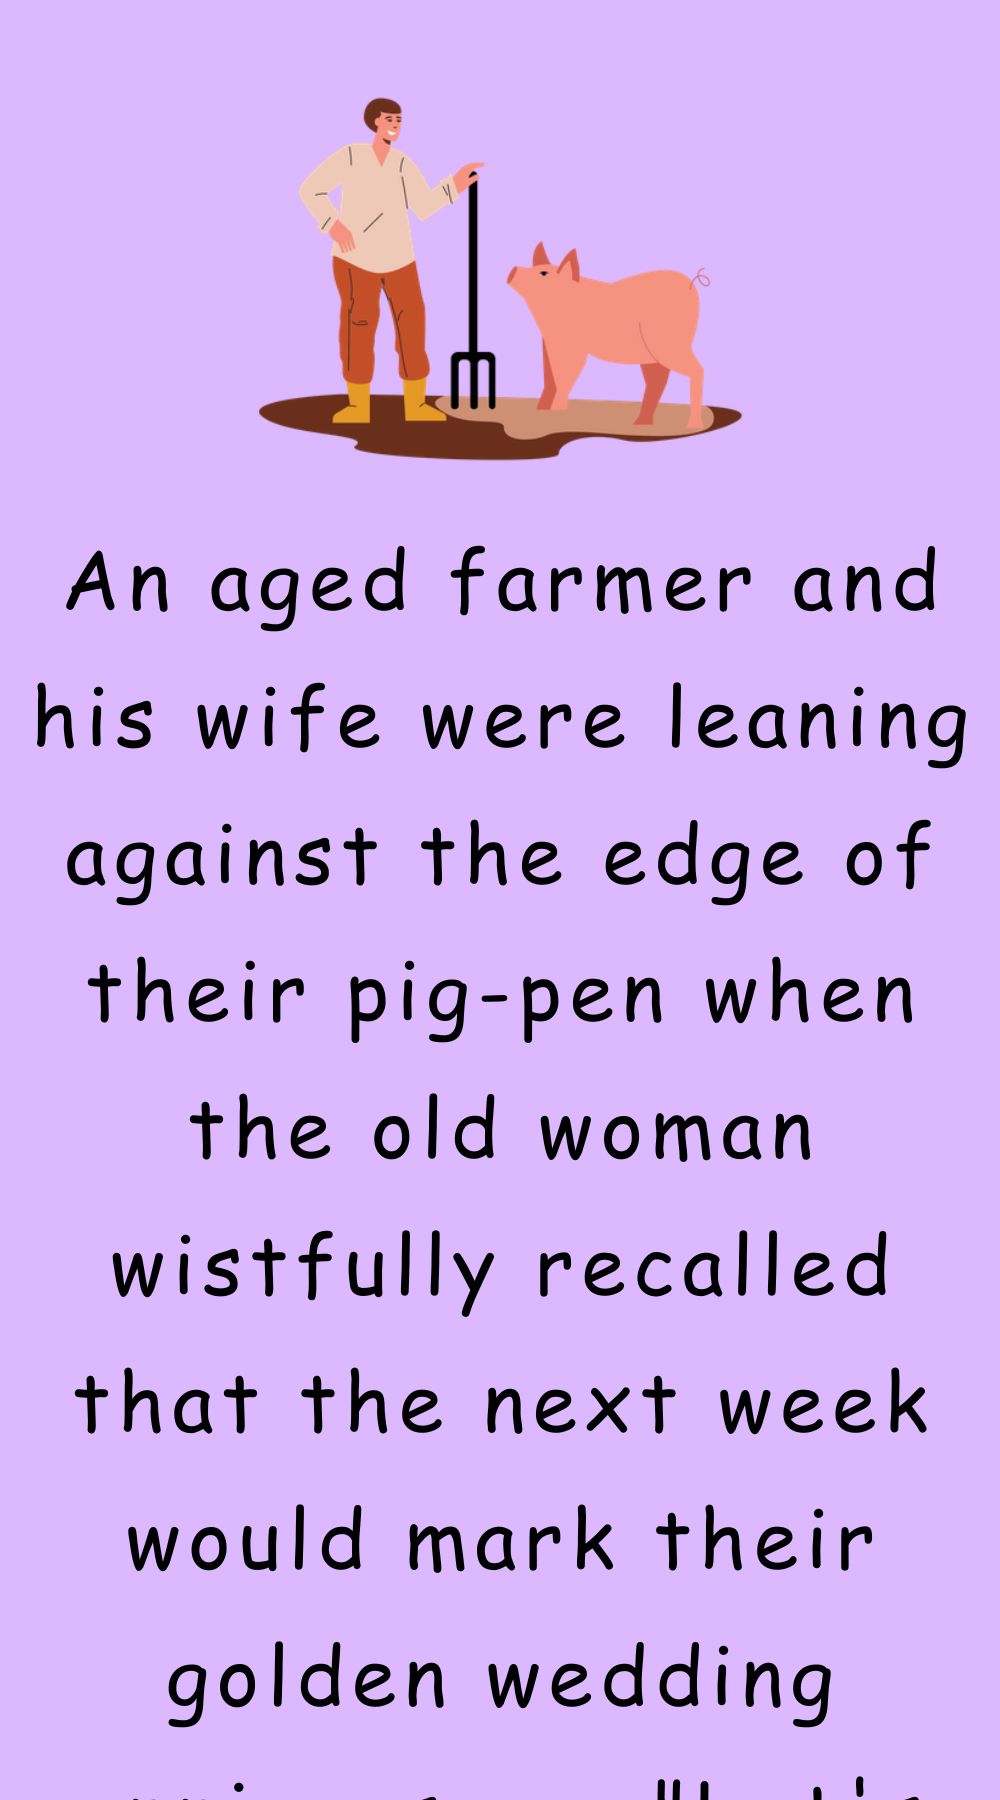 An aged farmer and his wife were leaning